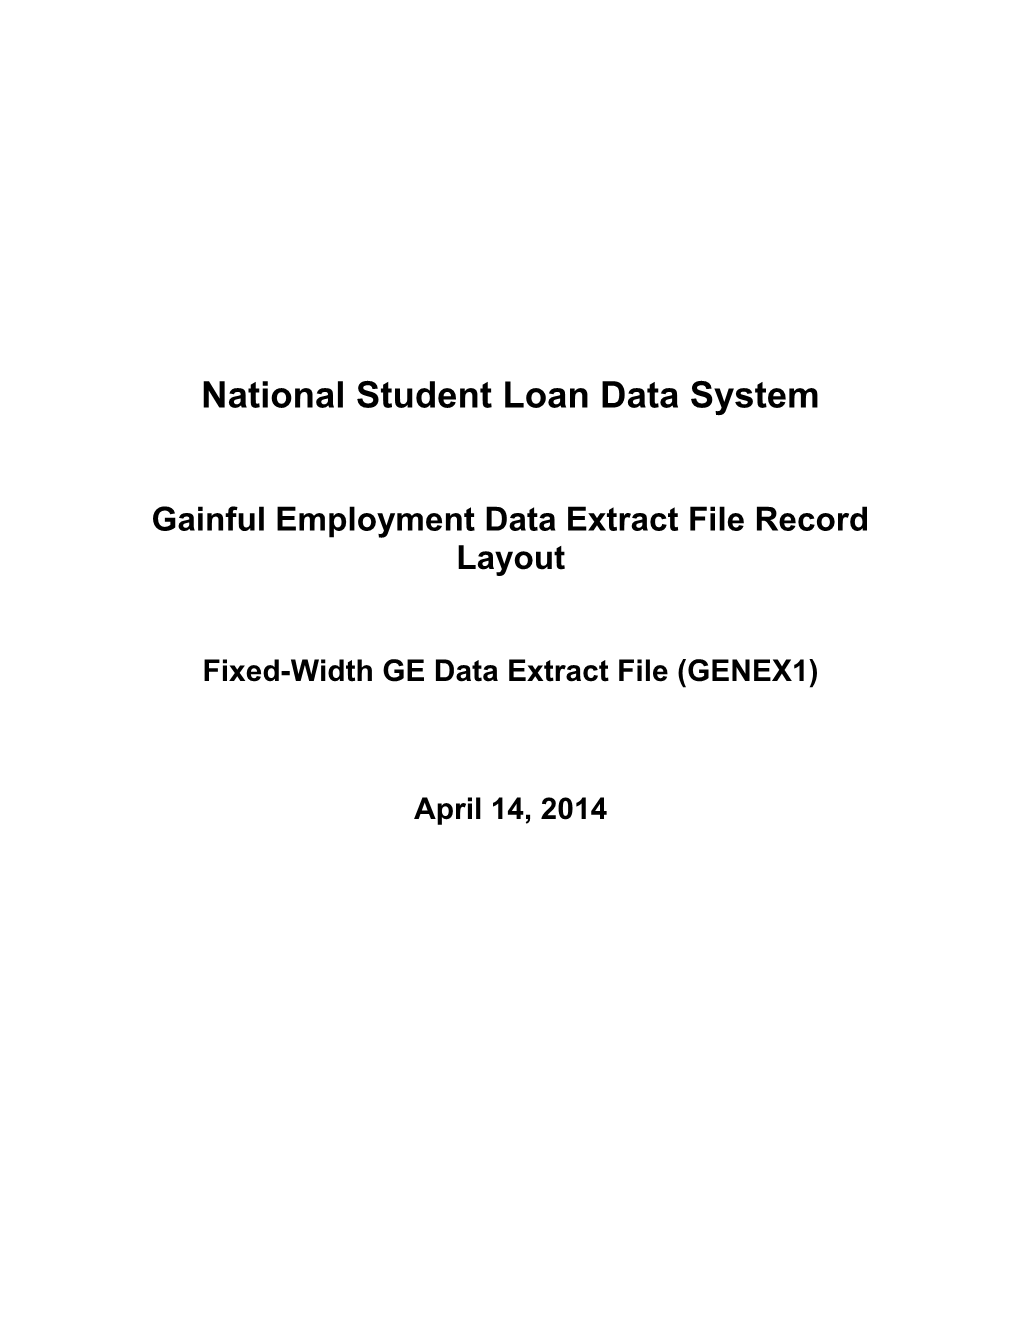 Gainful Employment Data Extract File Record Layout